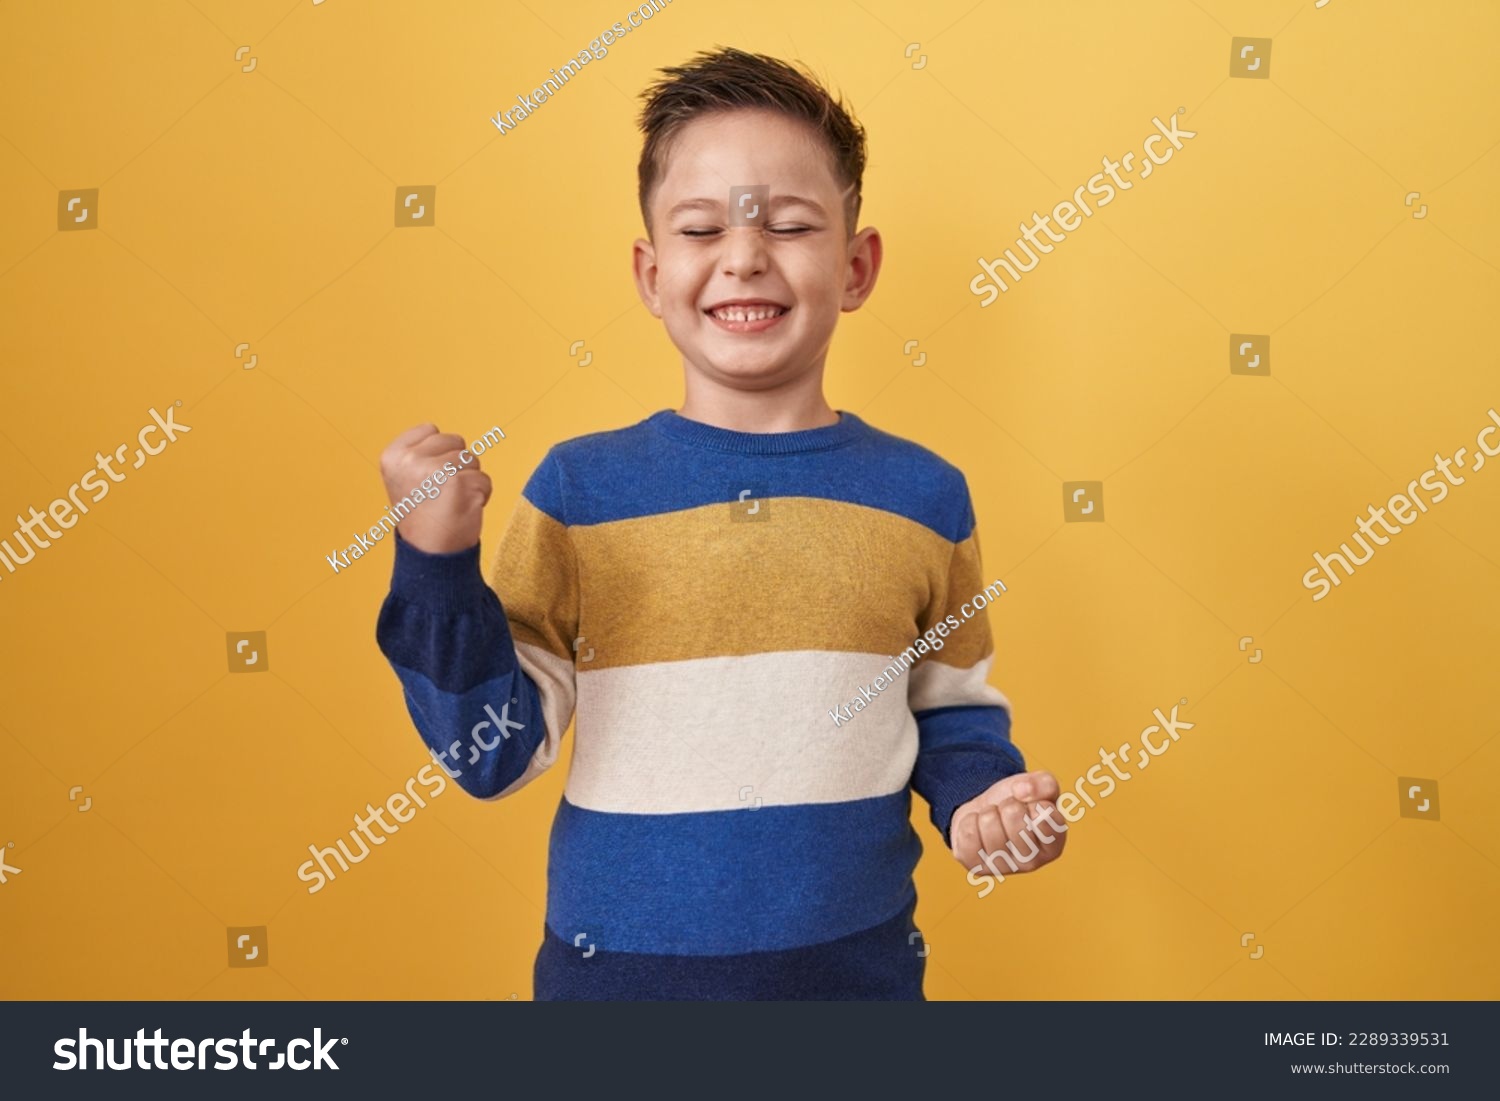 Little hispanic boy standing over yellow background celebrating surprised and amazed for success with arms raised and eyes closed  #2289339531